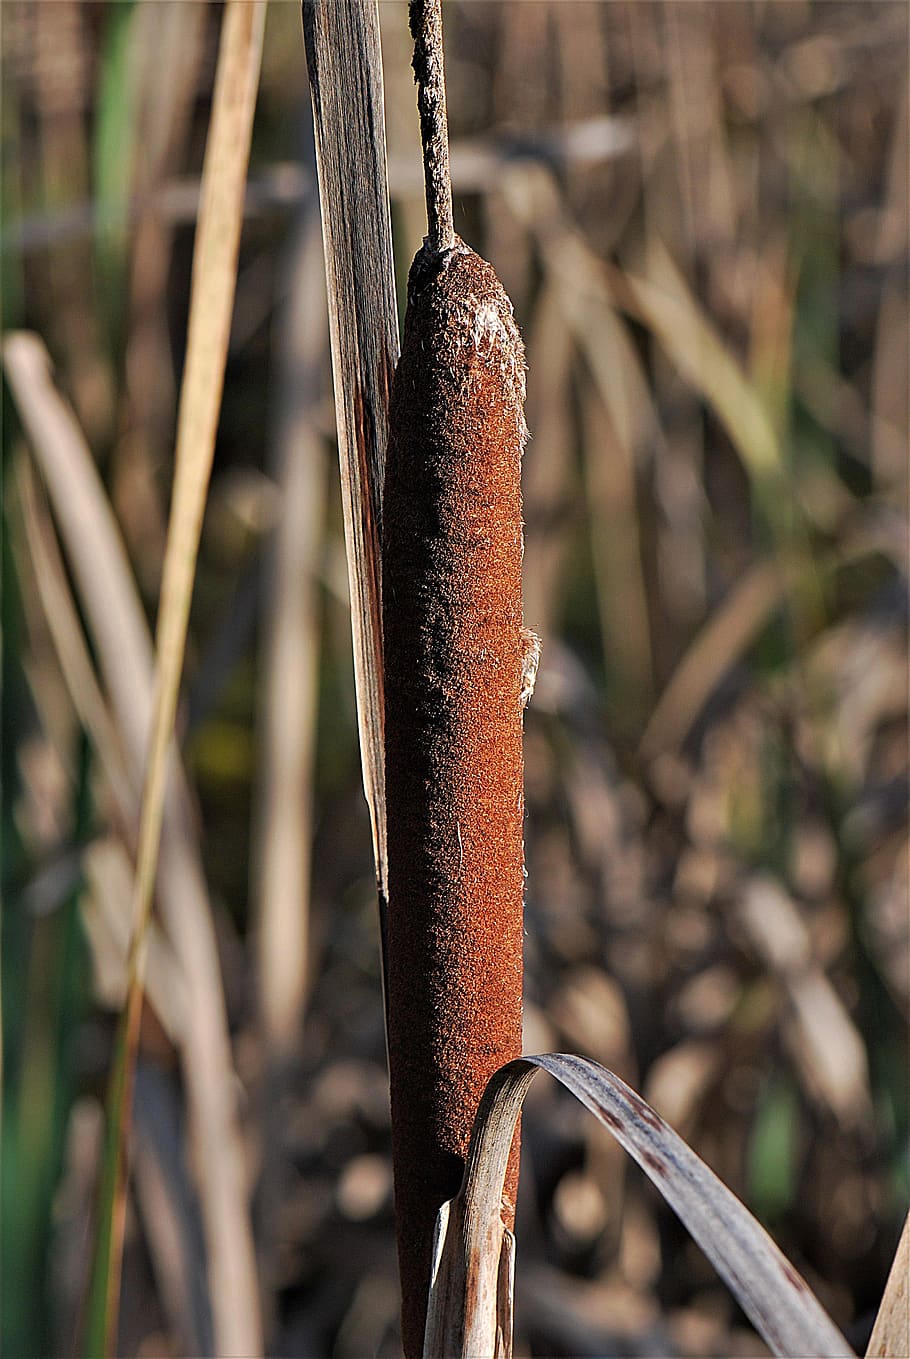 cattail, reed, tube piston greenhouse, plant, teichplanze, focus on foreground, close-up, nature, day, growth